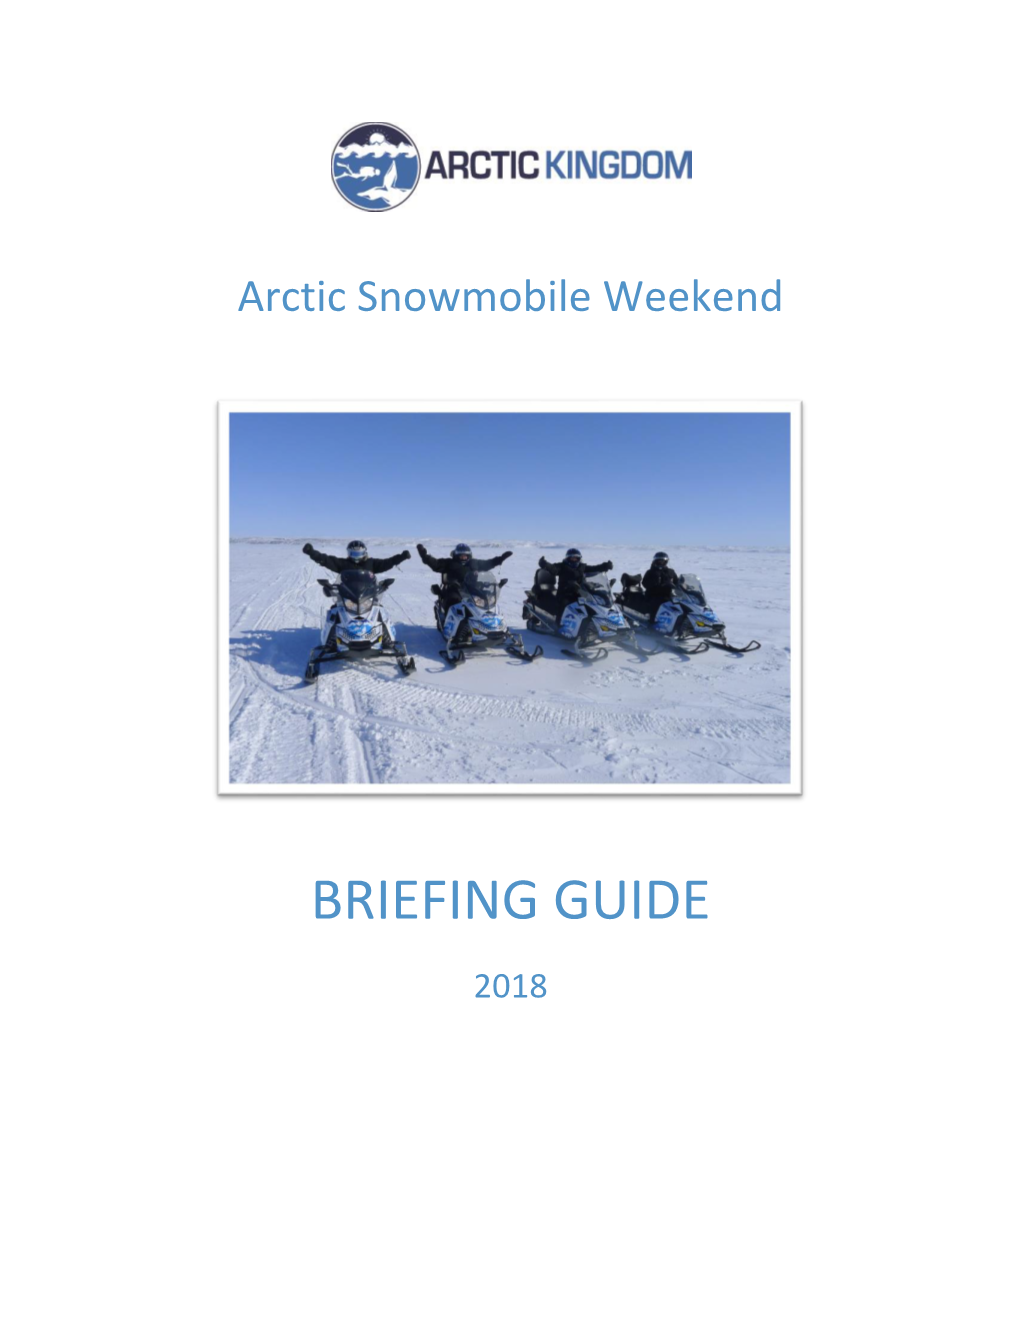 Briefing Guide 2018